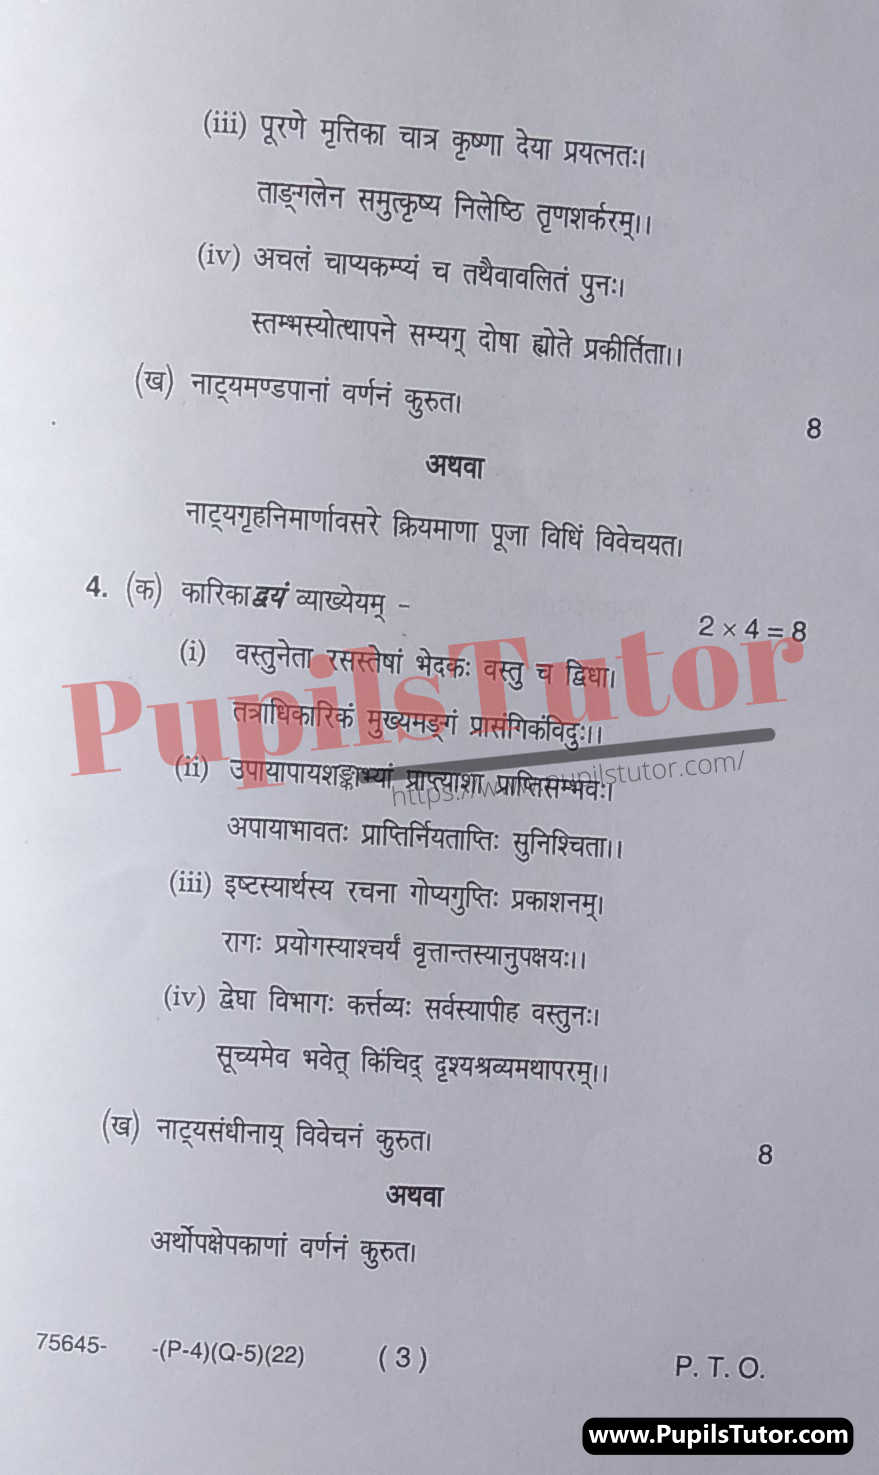 Free Download PDF Of M.D. University M.A. [Sanskrit] Third Semester Latest Question Paper For Natya Shastra Subject (Page 3) - https://www.pupilstutor.com